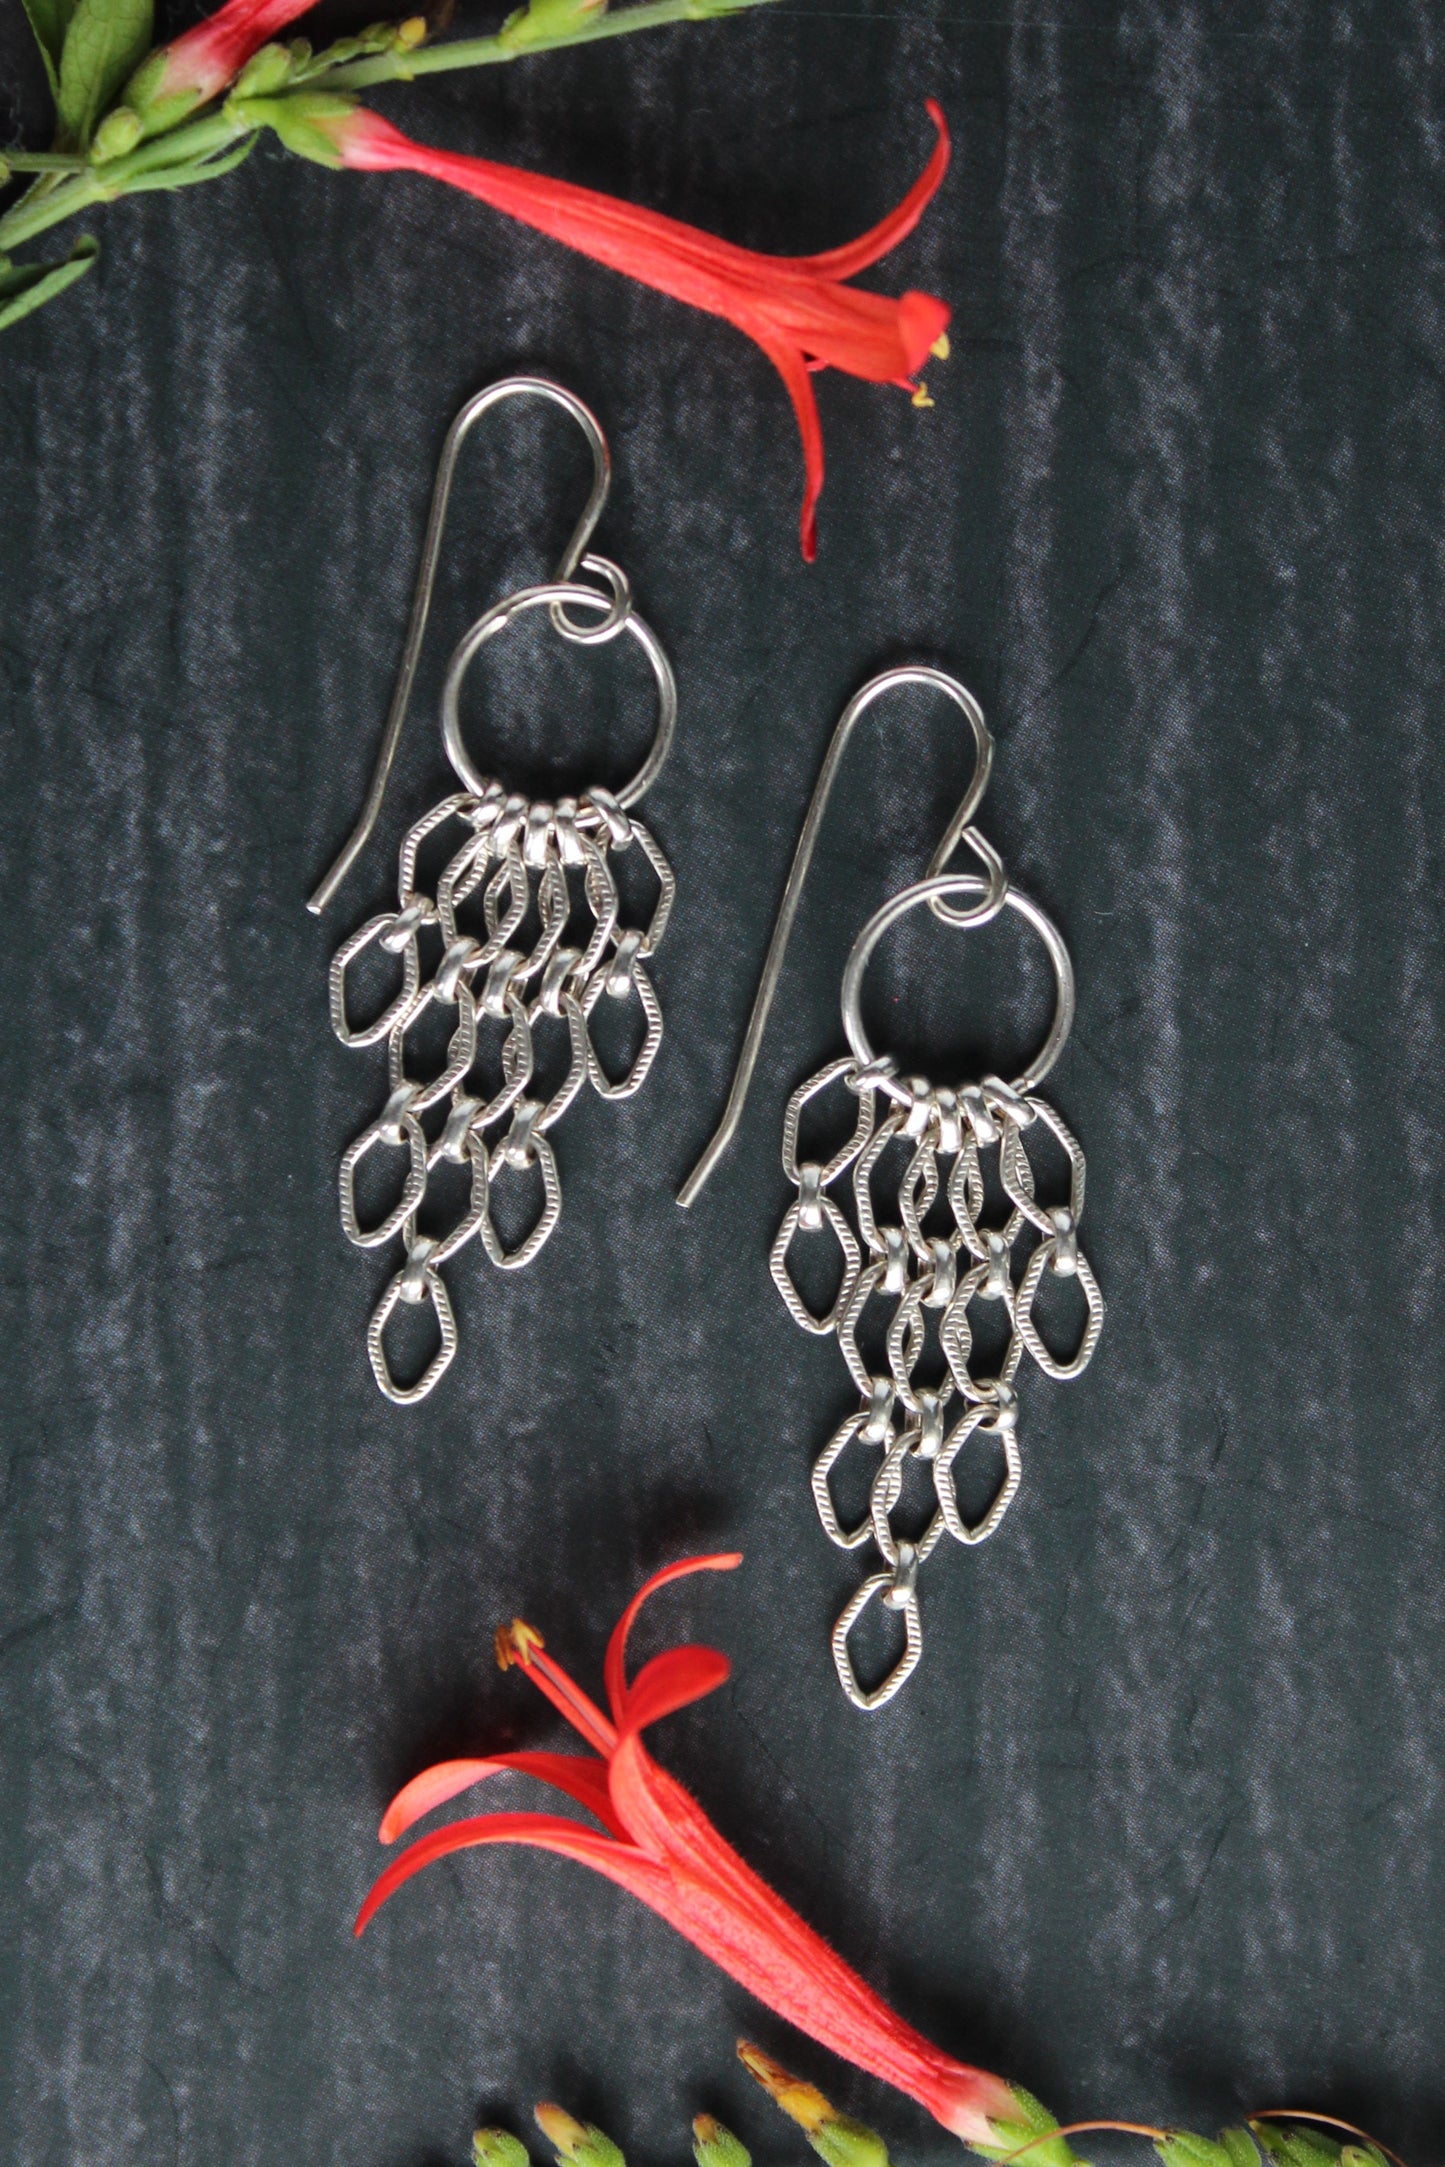 Revelry Earrings - Sterling Silver Marquise Chain Dangles. Handmade by Cara Carter Jewelry